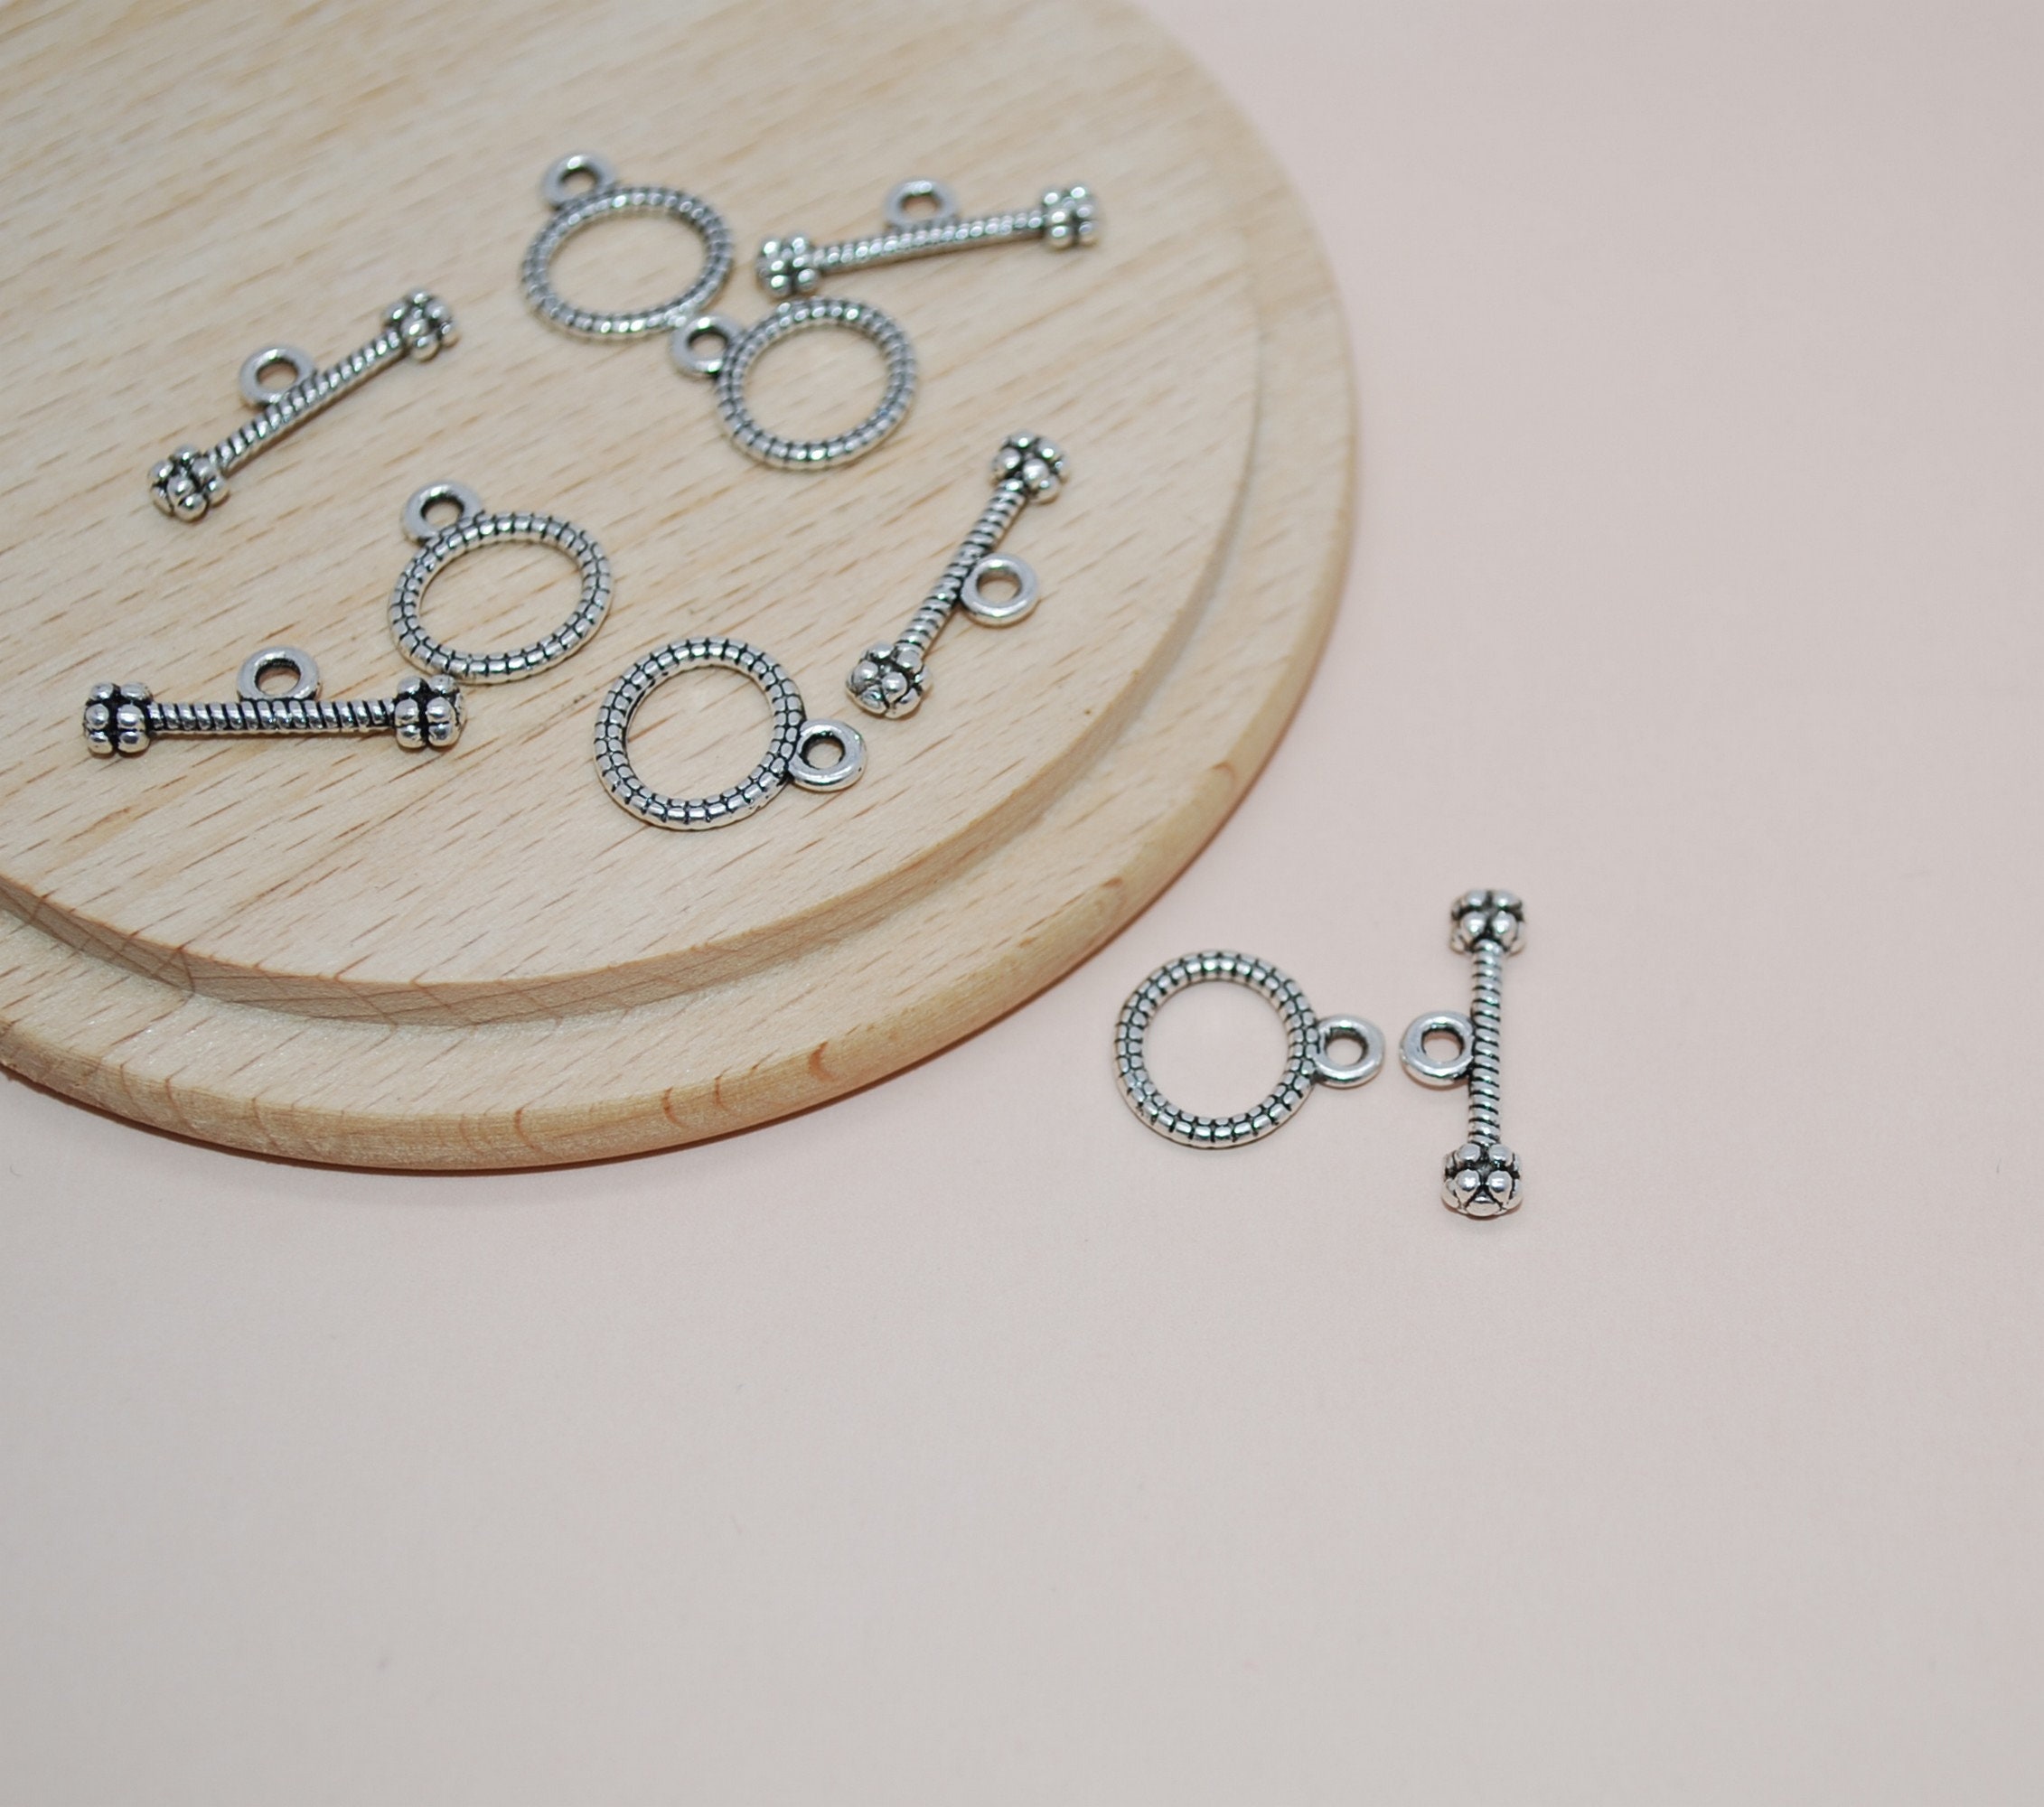 5 ea SILVER FILLED BRAIDED FLAT 12mm Toggle Clasps SF4 